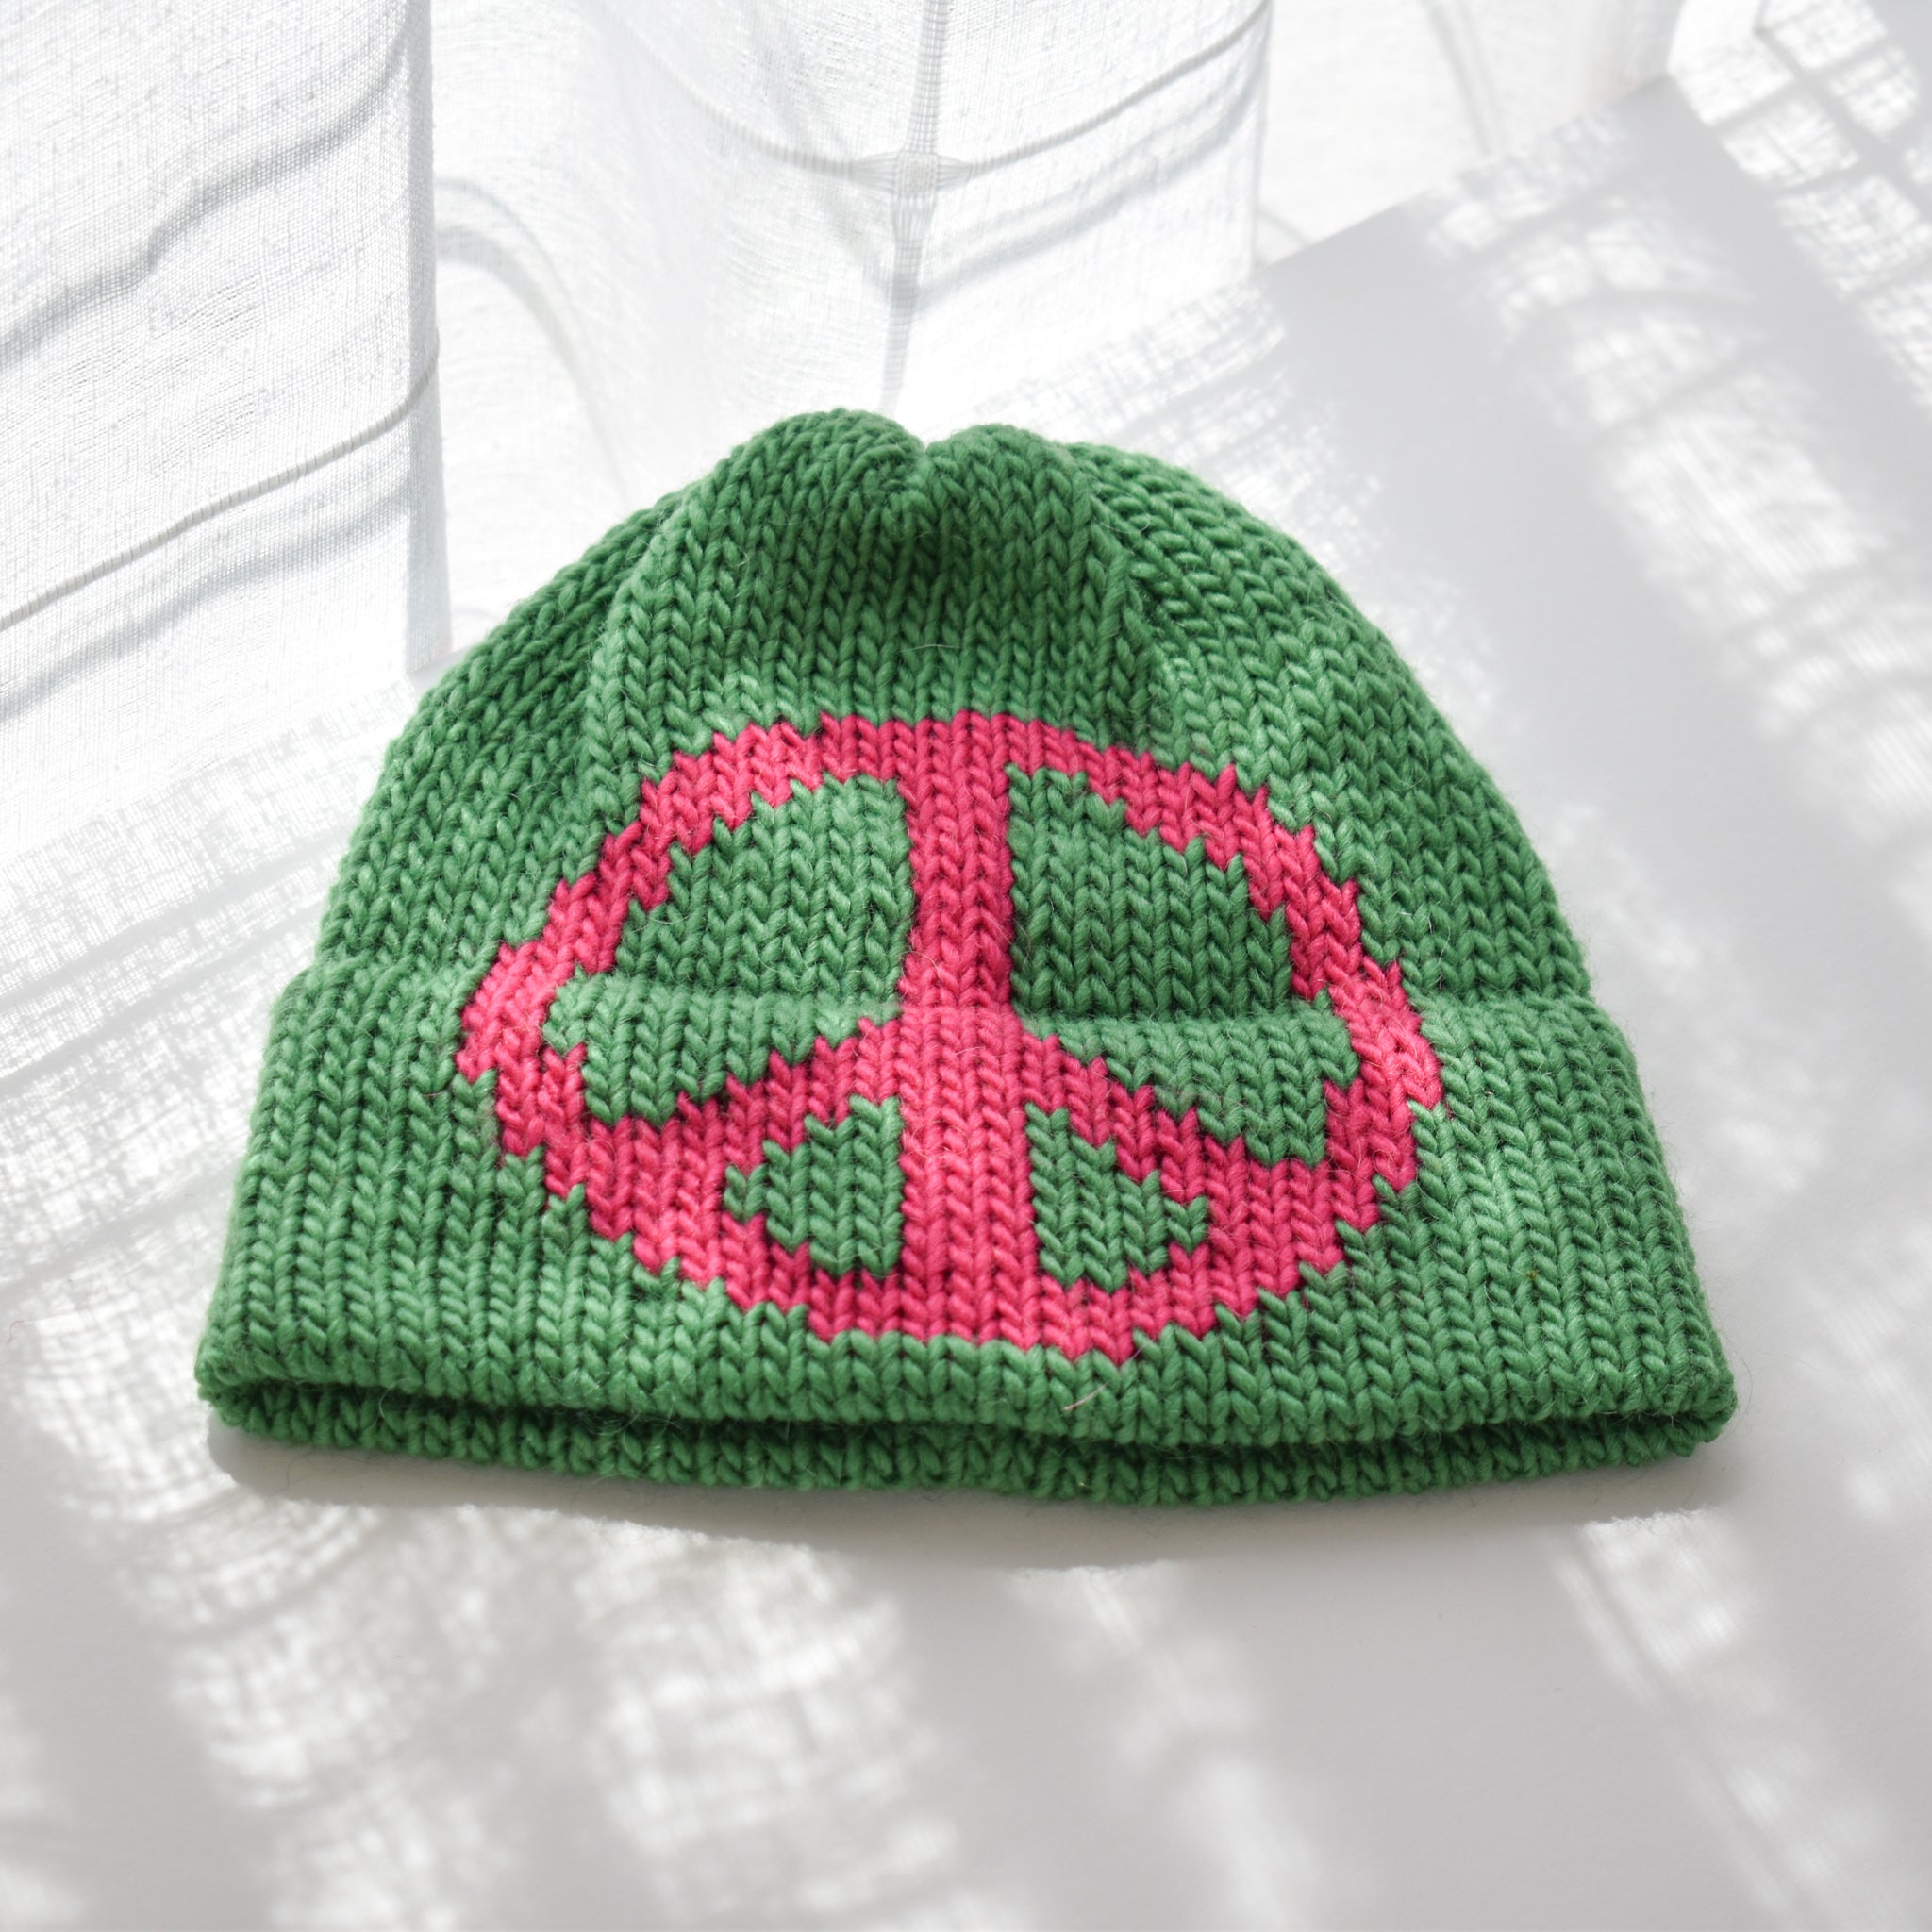 Haw Flakes Wafers Peace Beanie